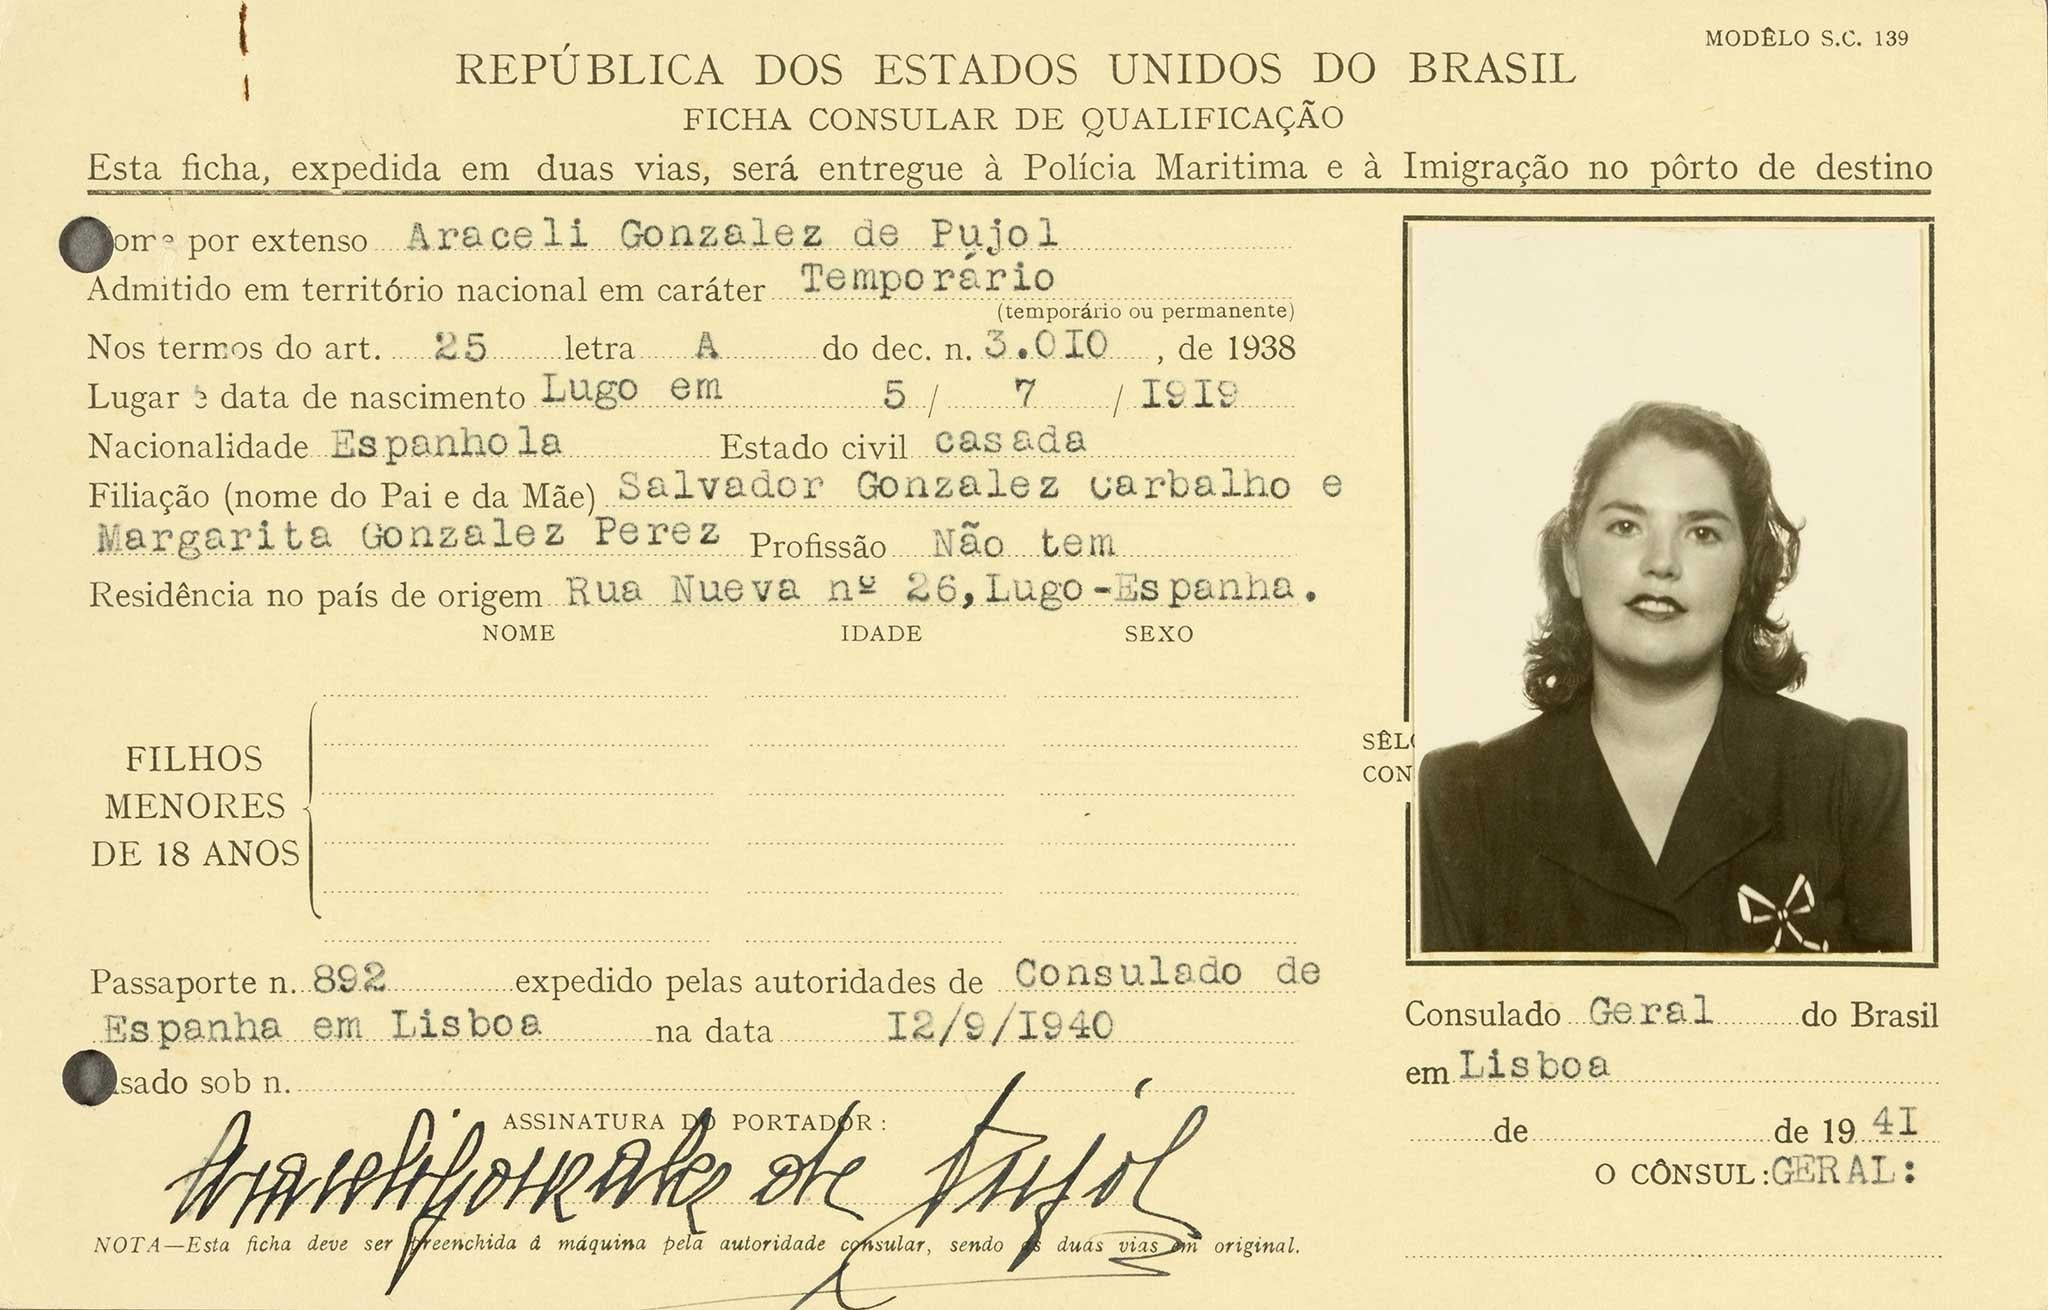 Brazilian ID card issued in 1940 while Mrs Garbo was in Lisbon